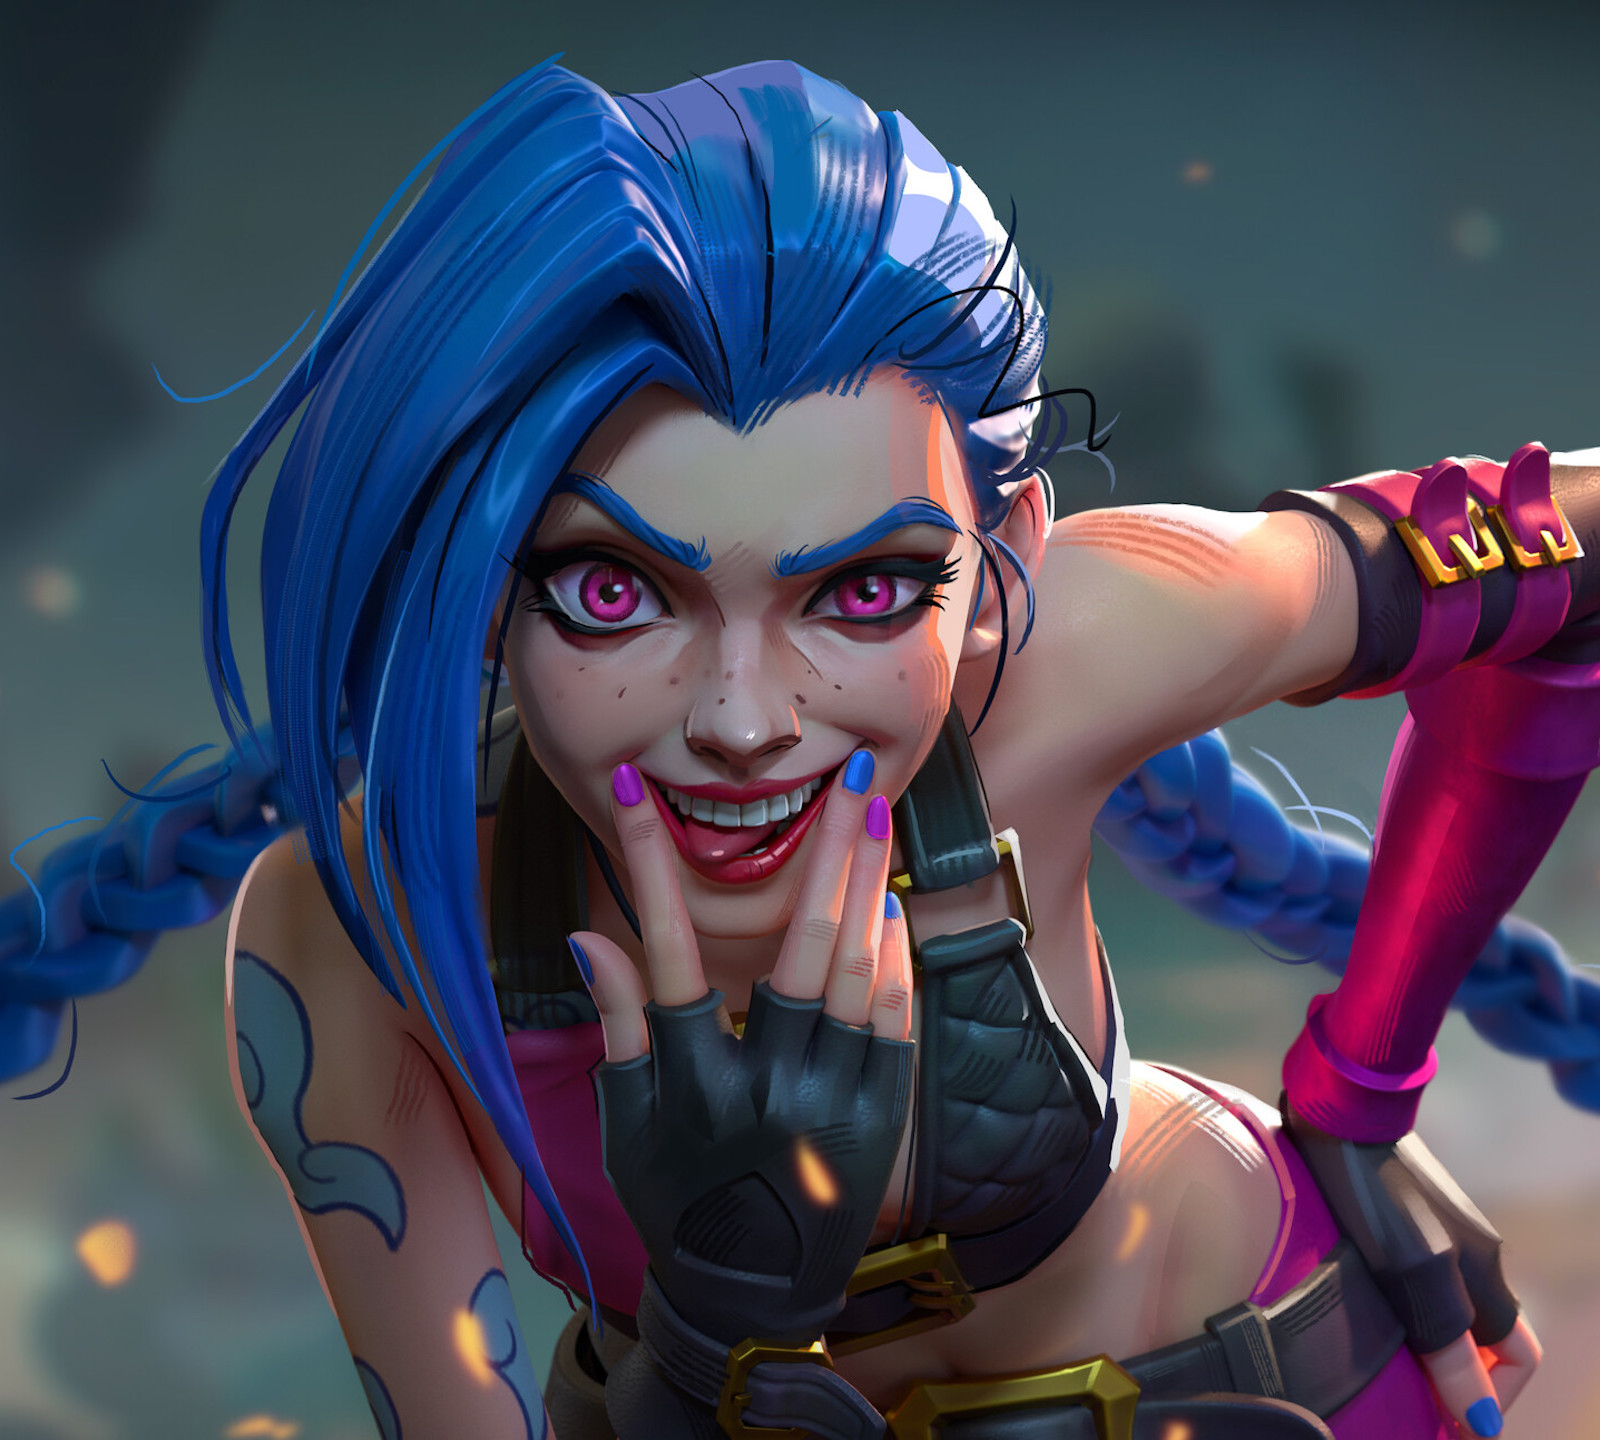 An Extremely-Realistic Version of Arcane's Jinx